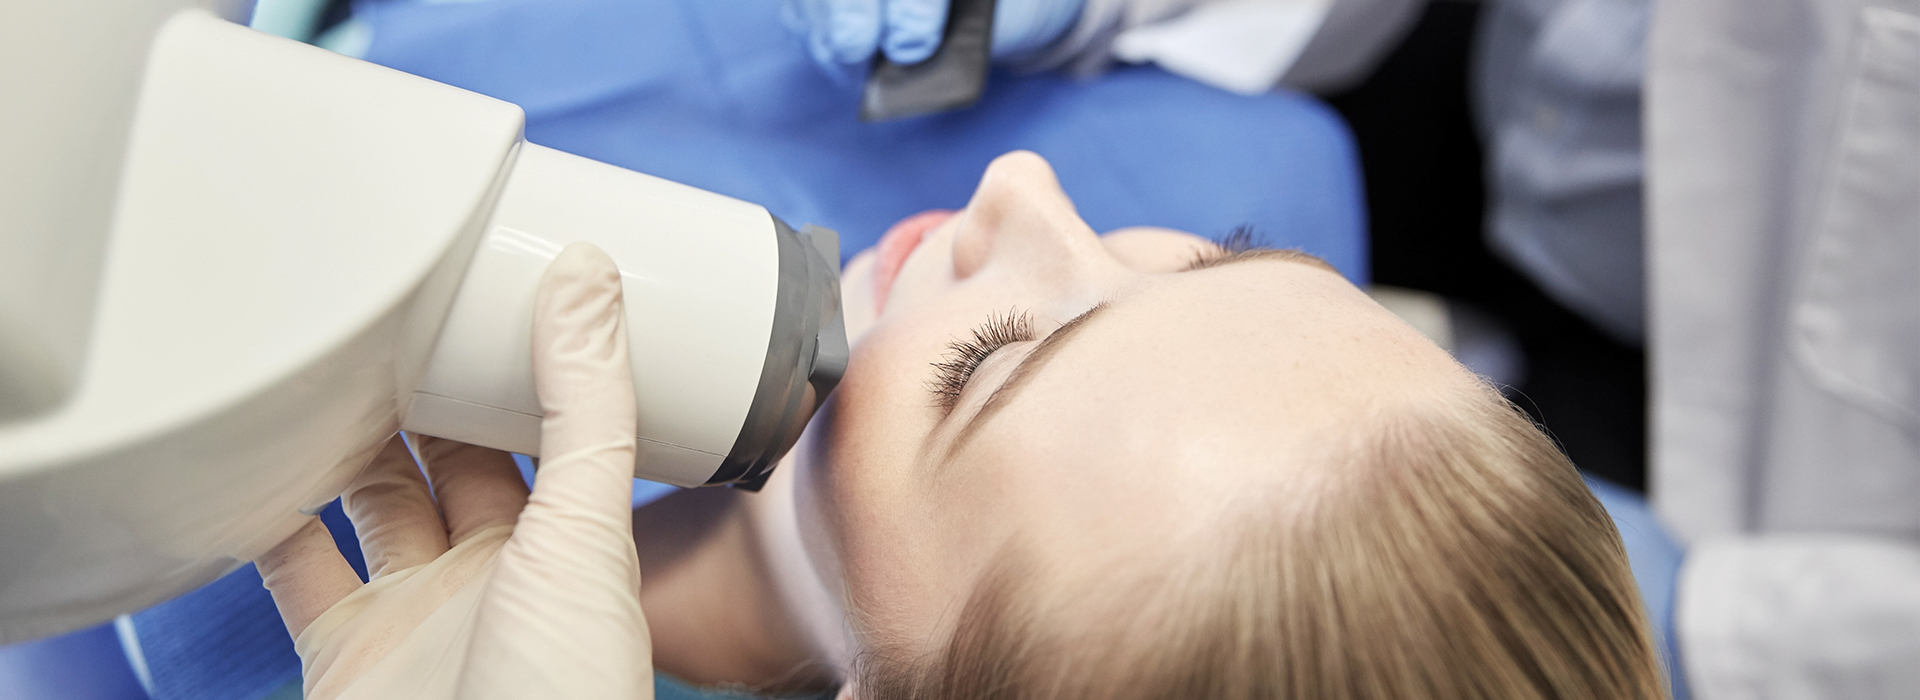 Pappas Family Dentistry | Laser Dentistry, Implant Dentistry and Extractions